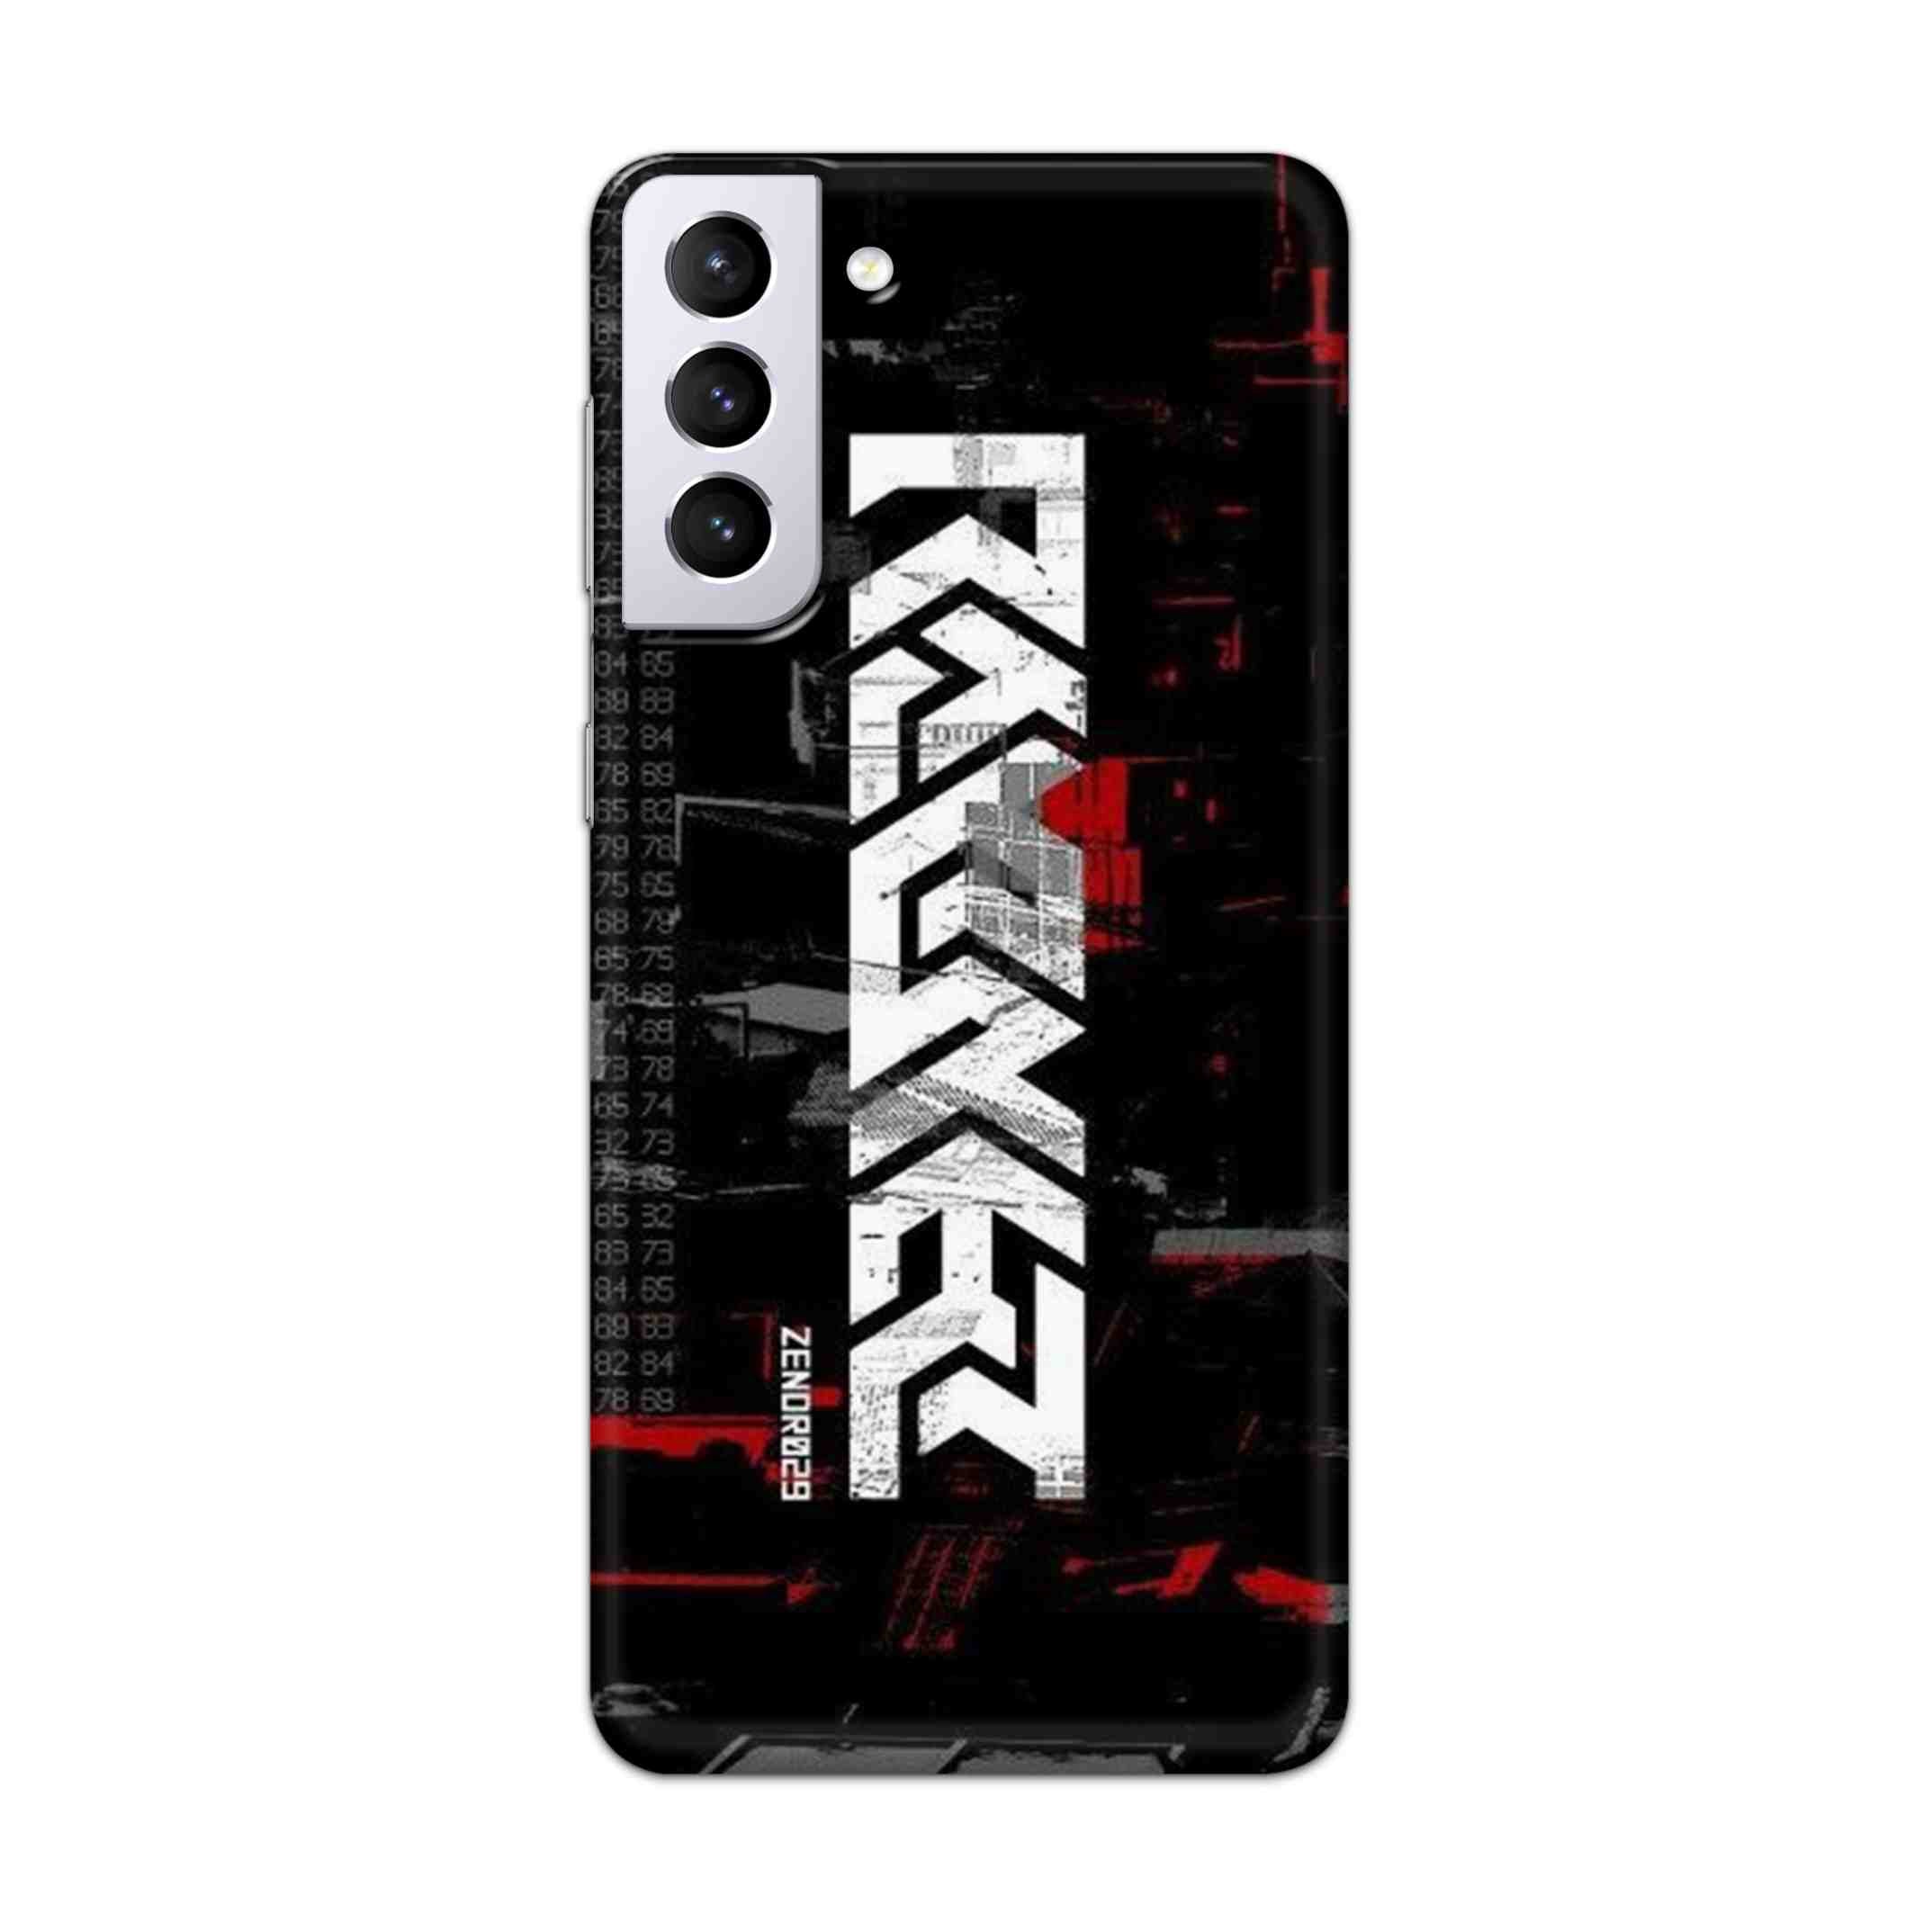 Buy Raxer Hard Back Mobile Phone Case Cover For Samsung Galaxy S21 Plus Online